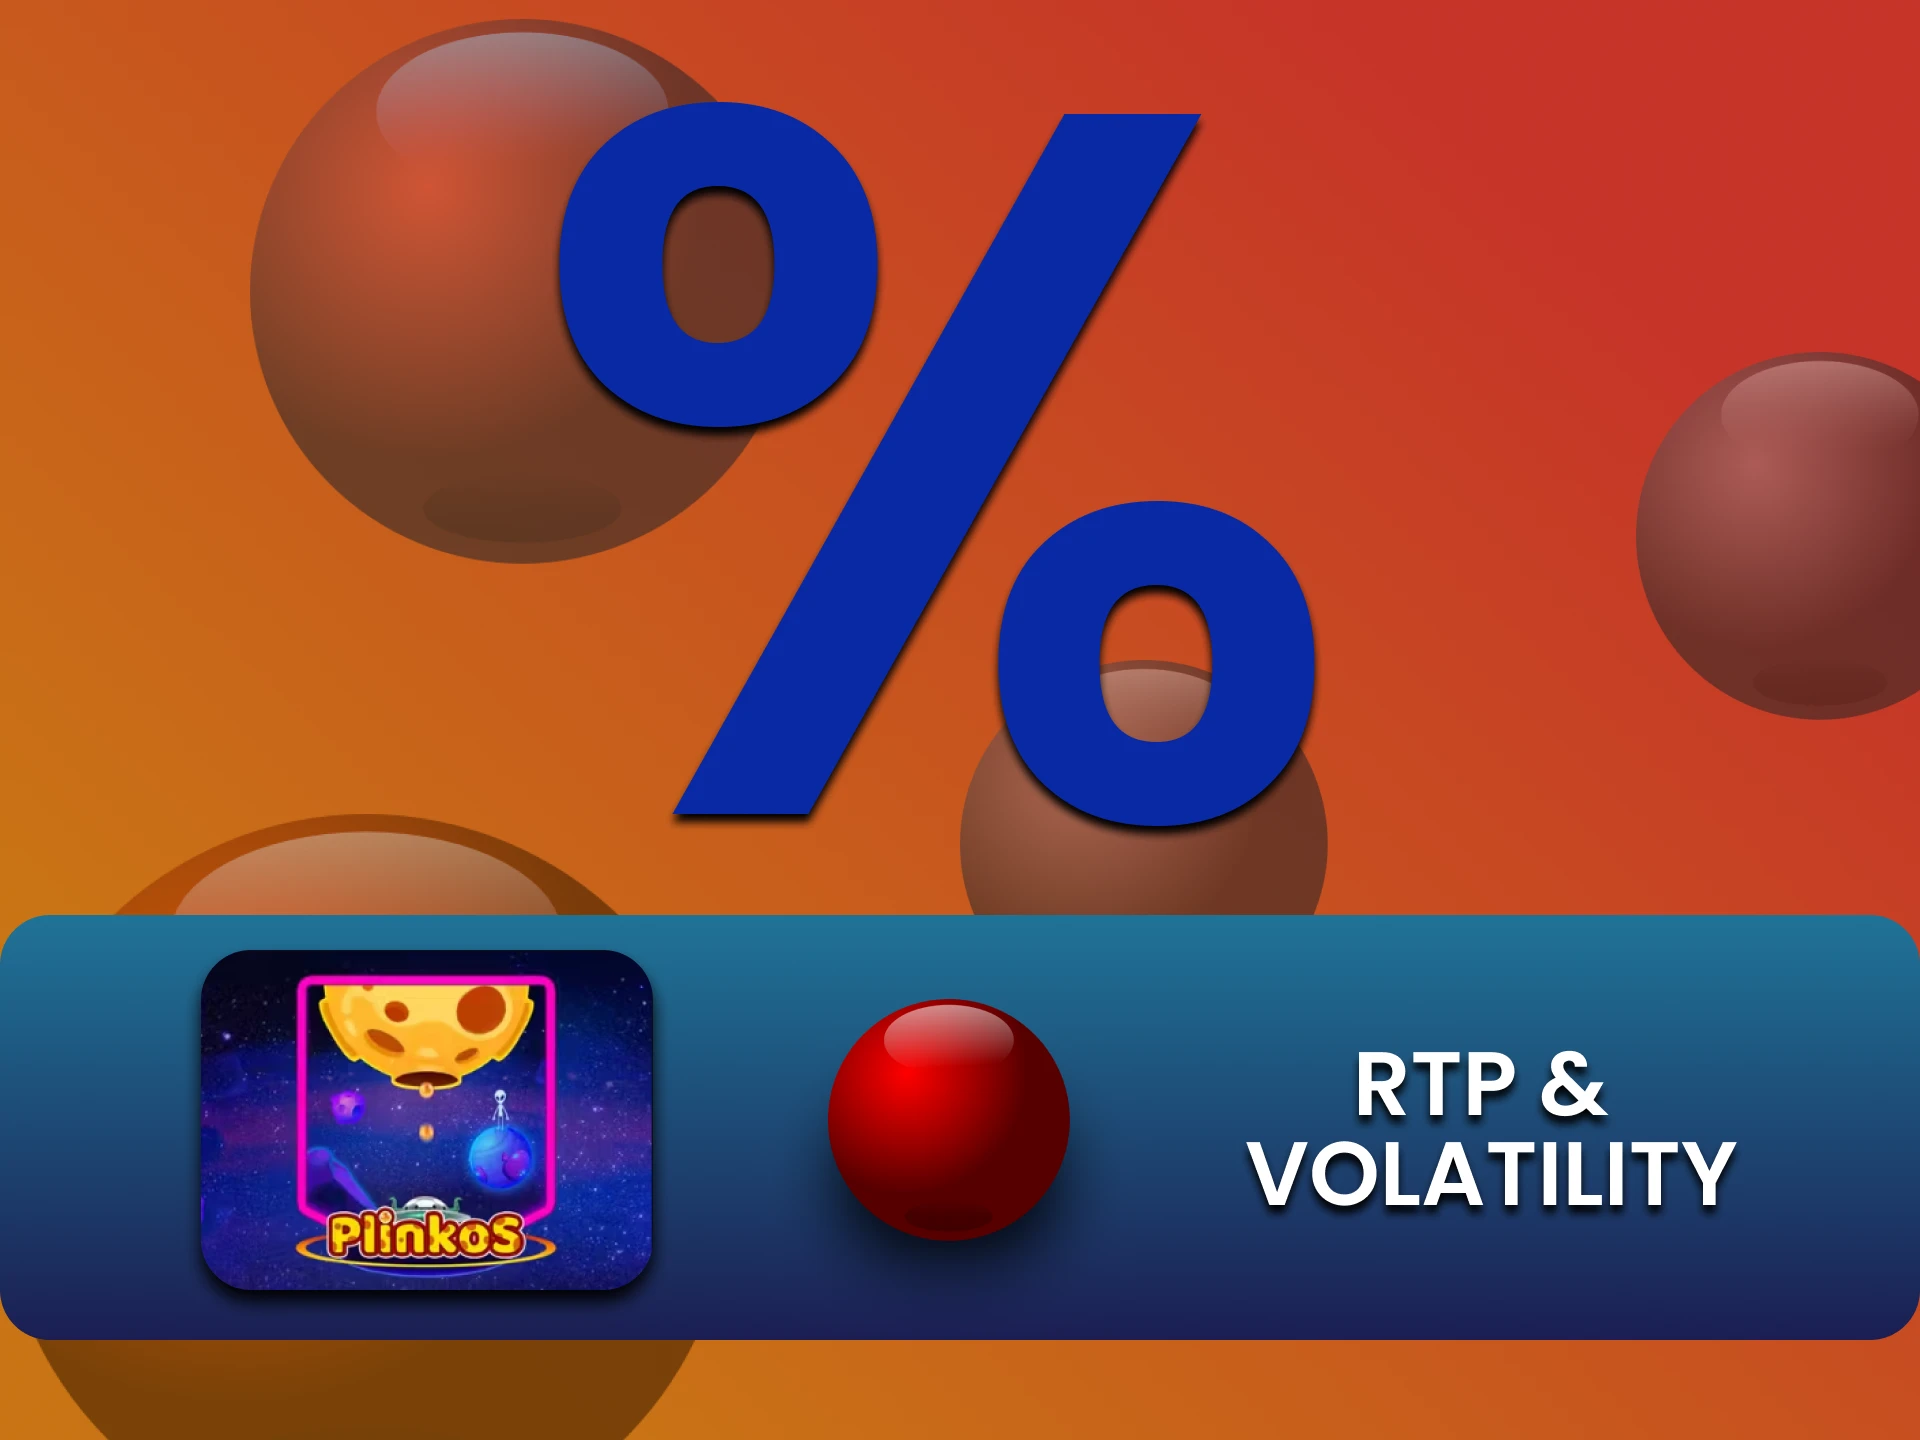 Find out what is your probability of winning at PlinkoS.